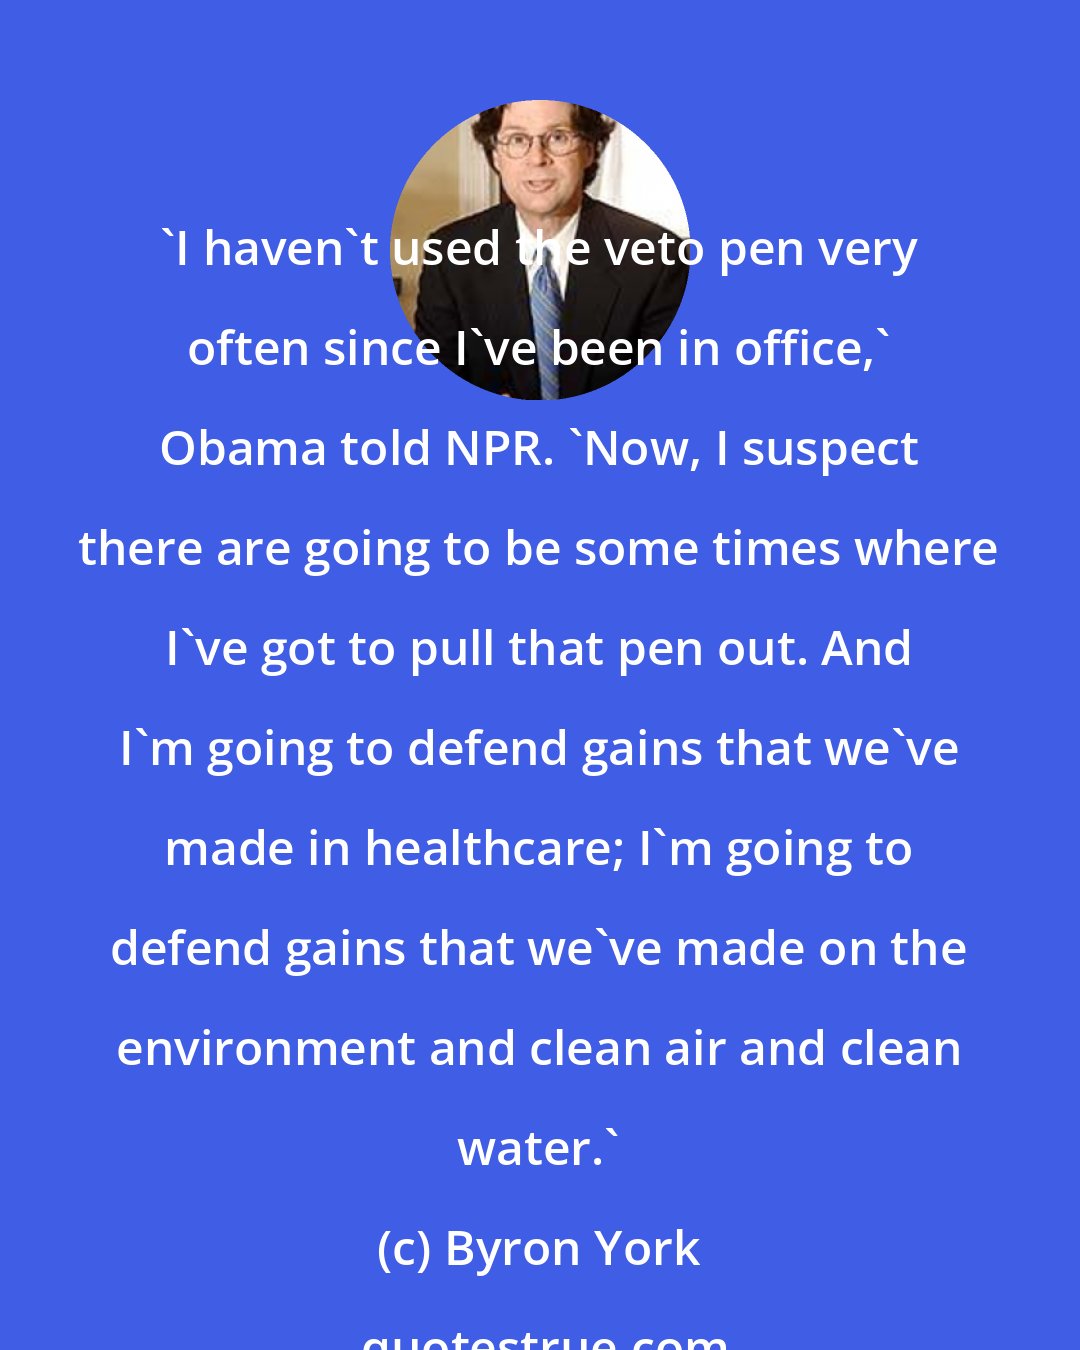 Byron York: 'I haven't used the veto pen very often since I've been in office,' Obama told NPR. 'Now, I suspect there are going to be some times where I've got to pull that pen out. And I'm going to defend gains that we've made in healthcare; I'm going to defend gains that we've made on the environment and clean air and clean water.'